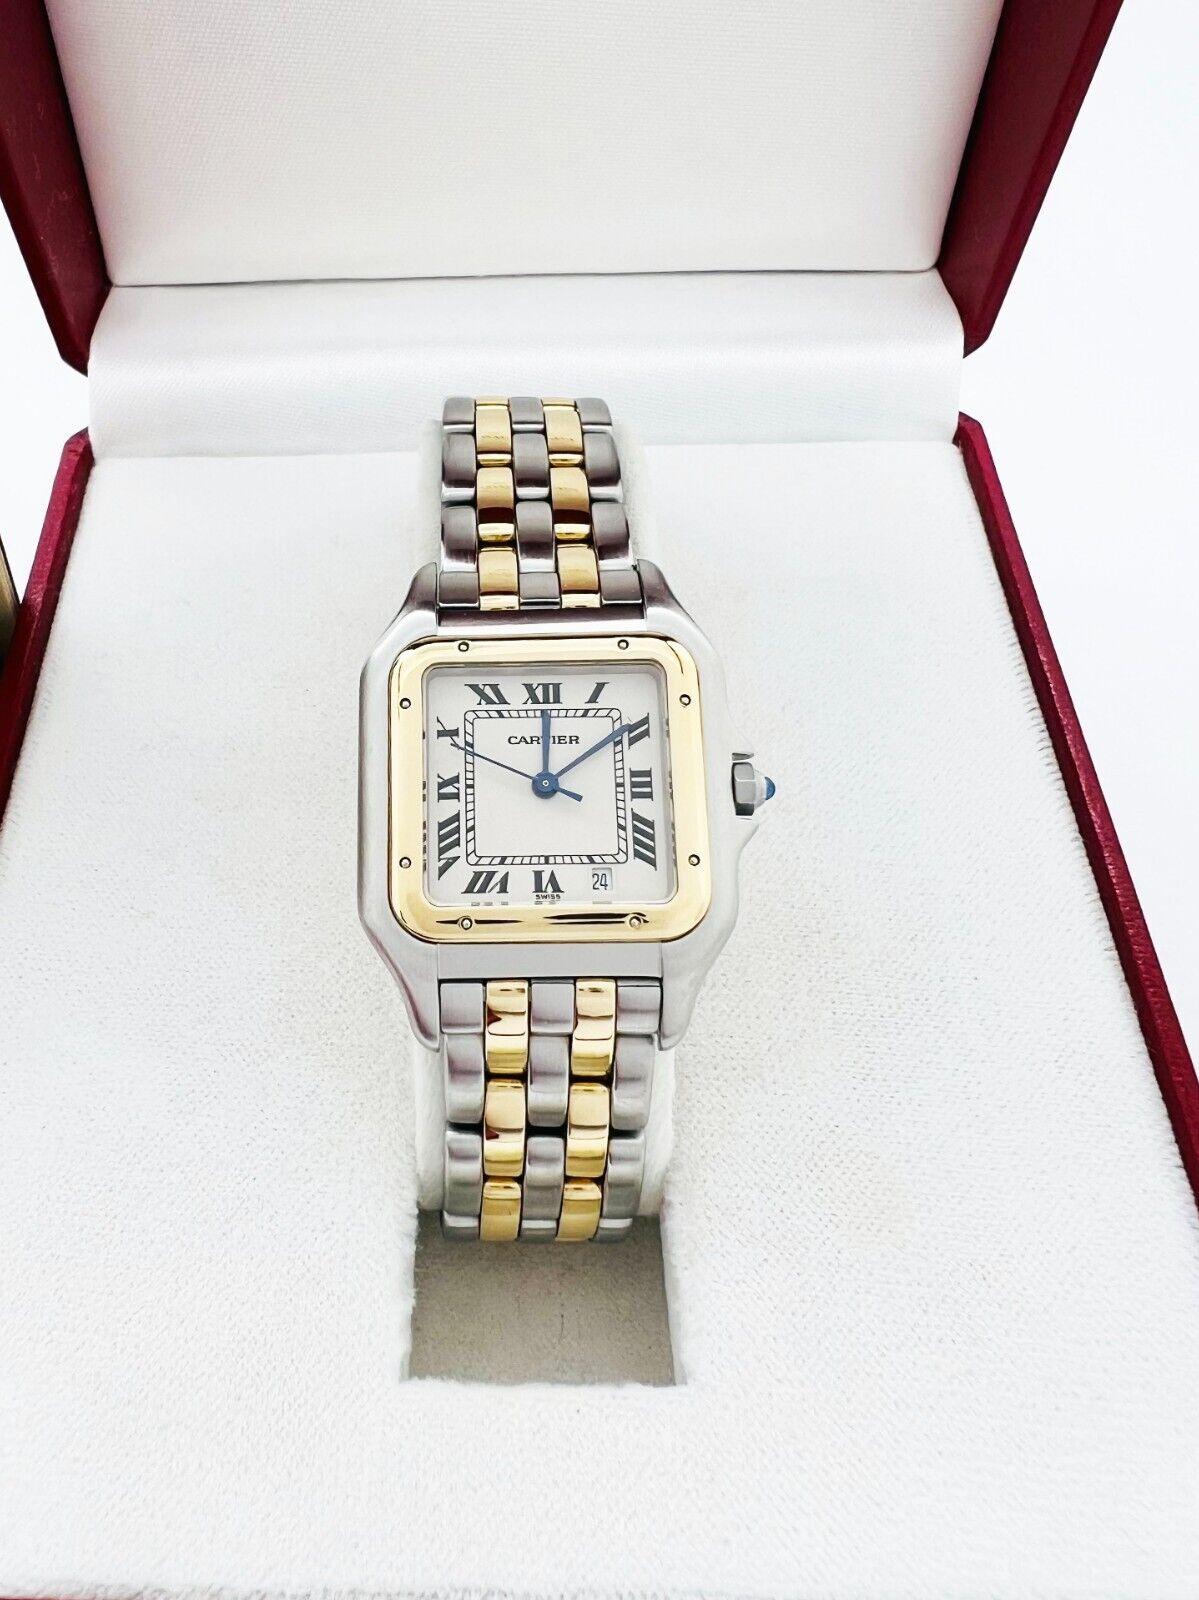 Style Number: 187949
 
Model: Panthere 
 
Case Material: Stainless Steel
 
Band: 18K Yellow Gold & Stainless Steel
 
Bezel:  18K Yellow Gold
 
Face: Sapphire Crystal
 
Case Size: 27mm 
 
Includes: 
-Cartier Box & Paper 
-Certified Appraisal 
-1 Year